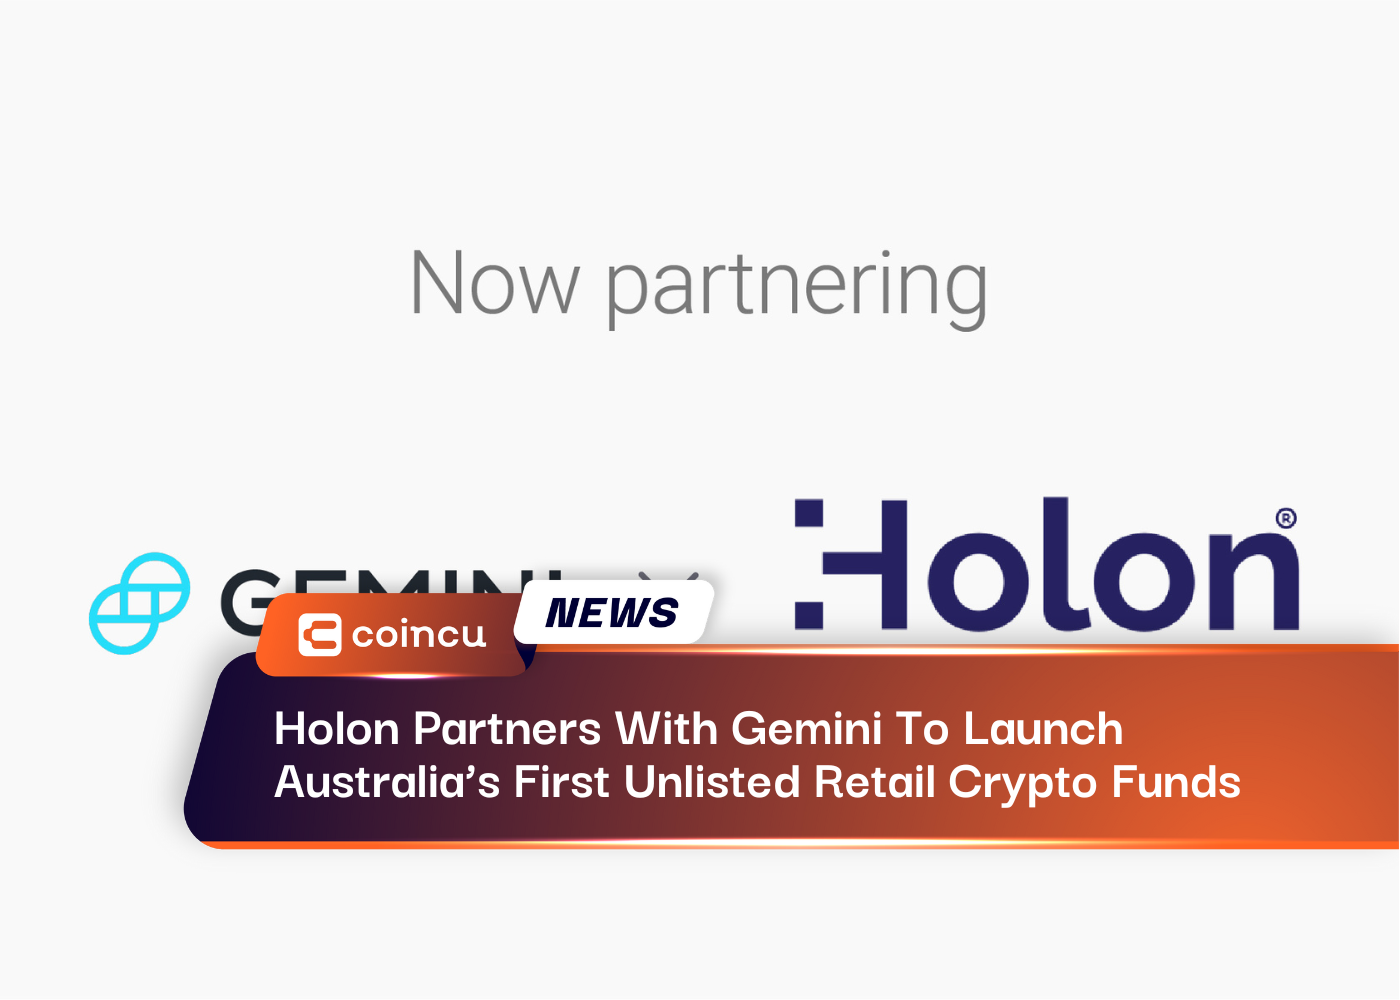 Holon Partners With Gemini To Launch